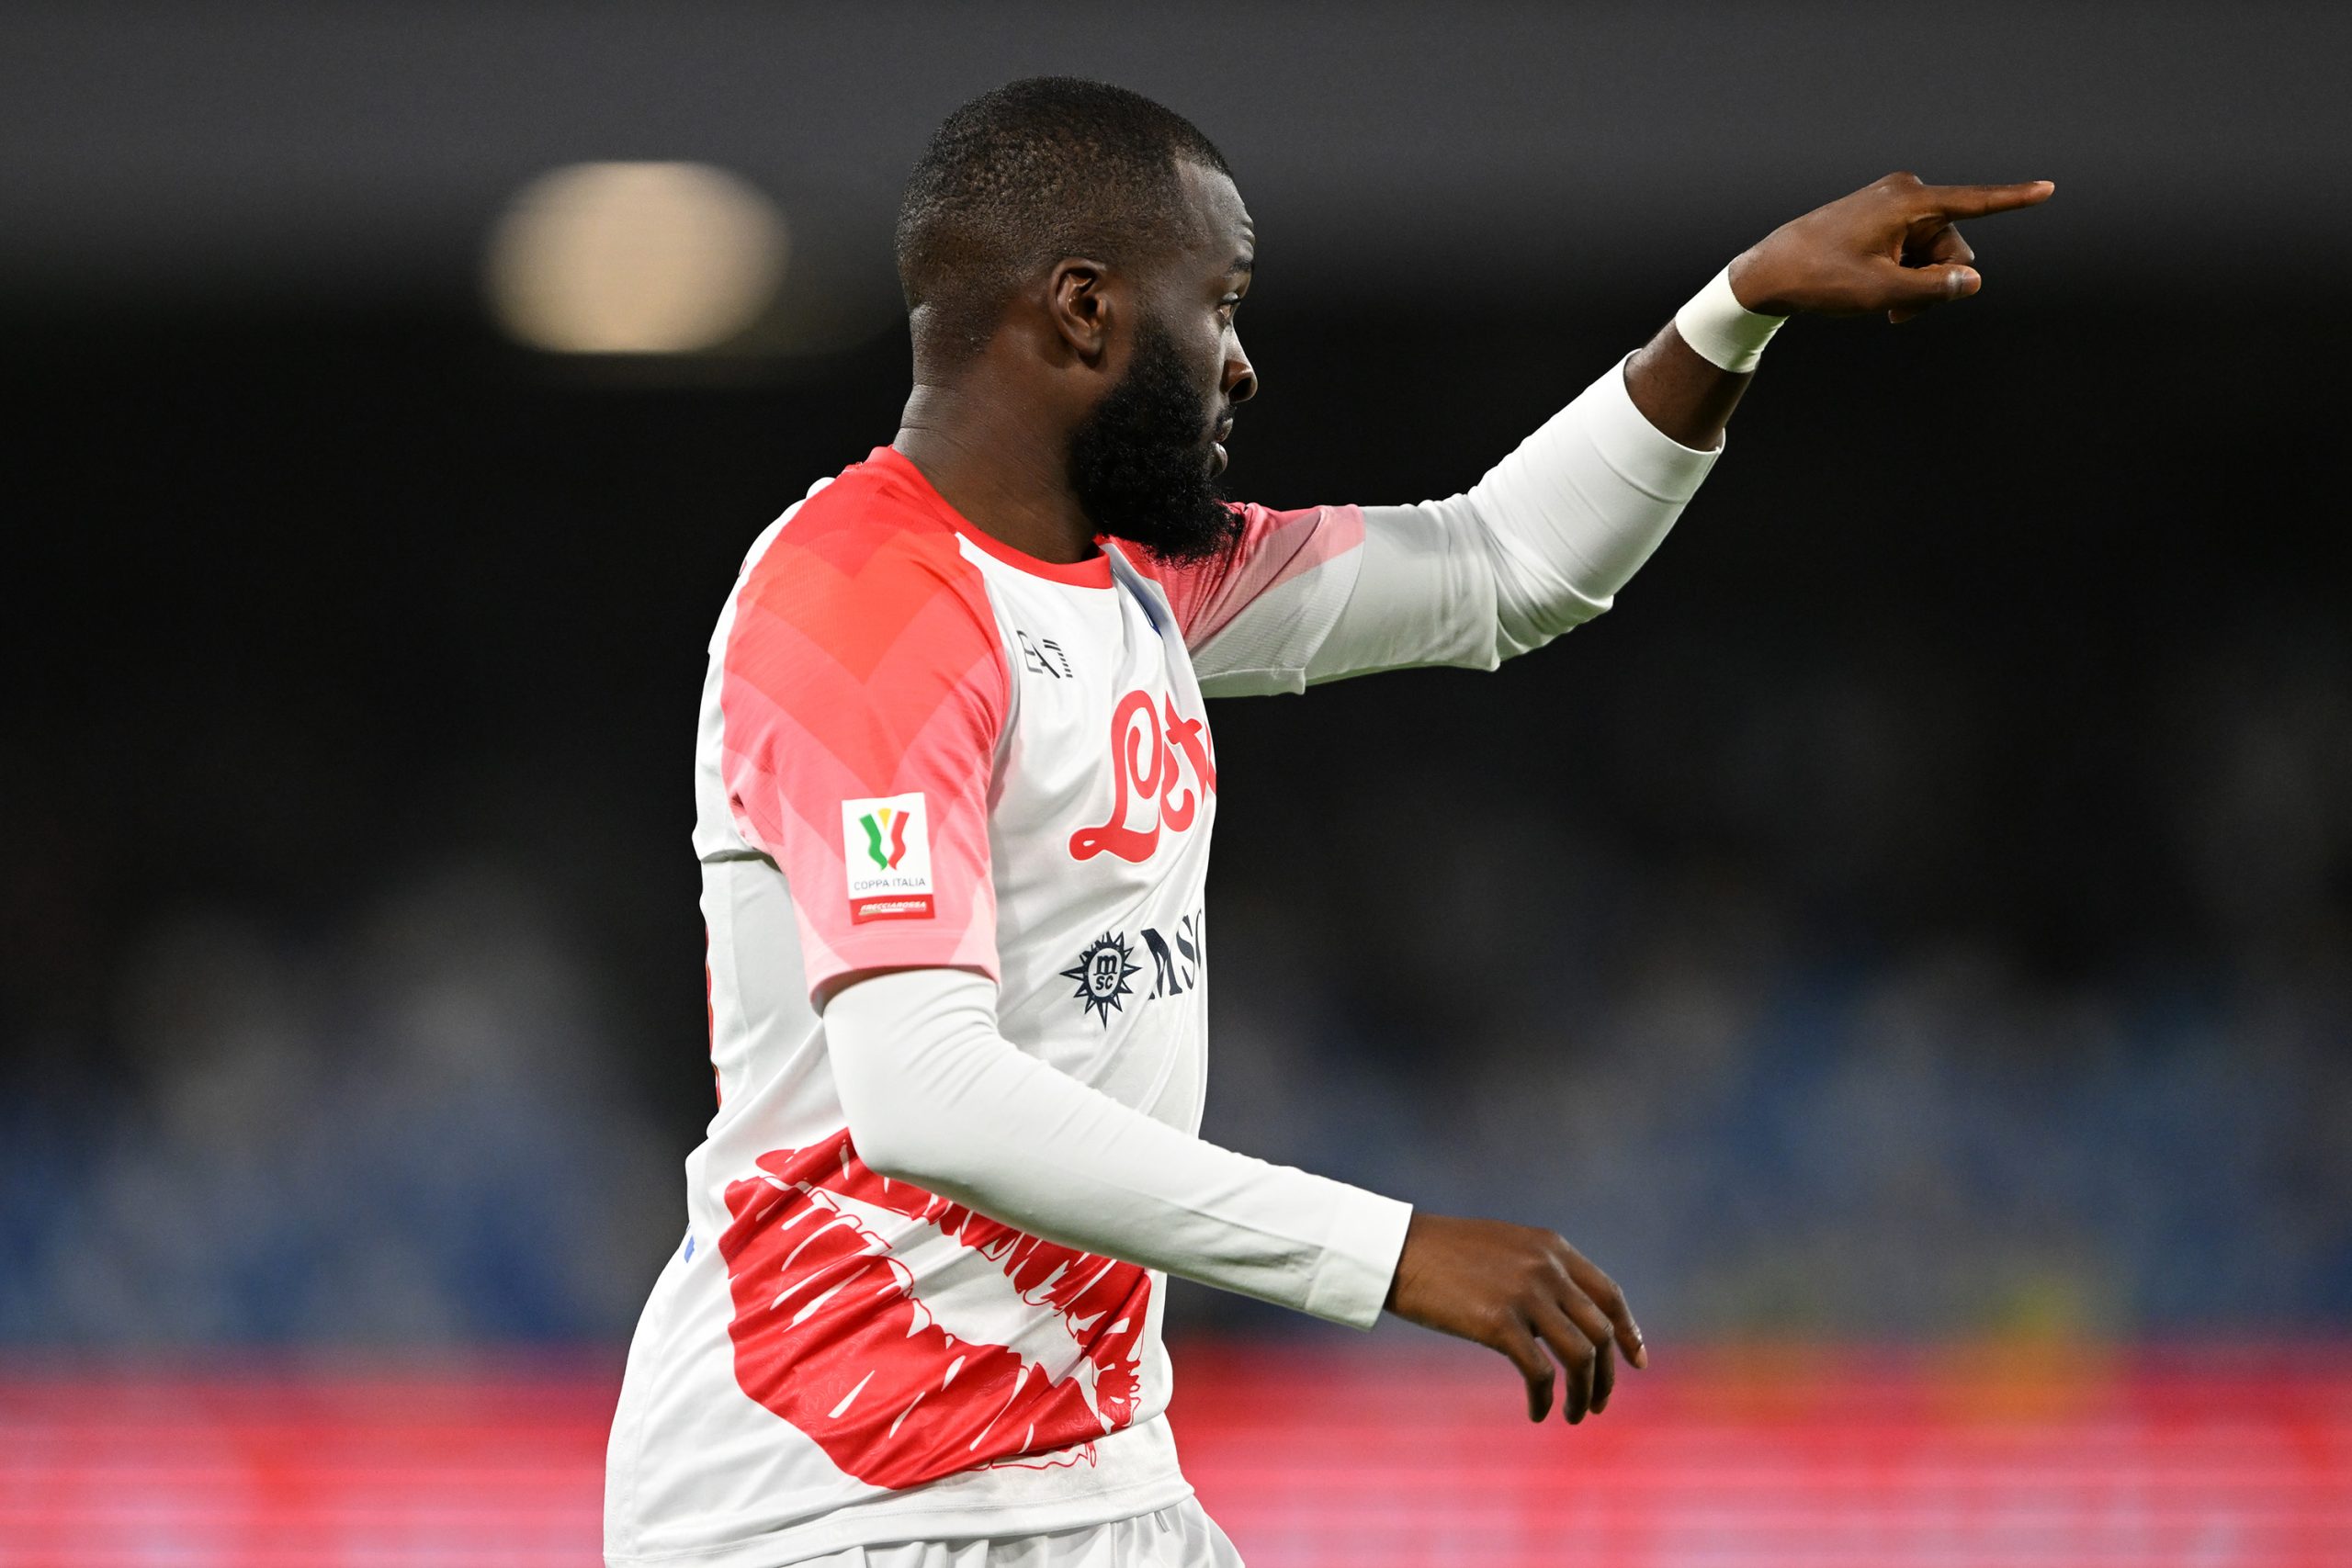 Tanguy Ndombele failed to impress Ange Postecoglou on the first day of training at Tottenham Hotspur.